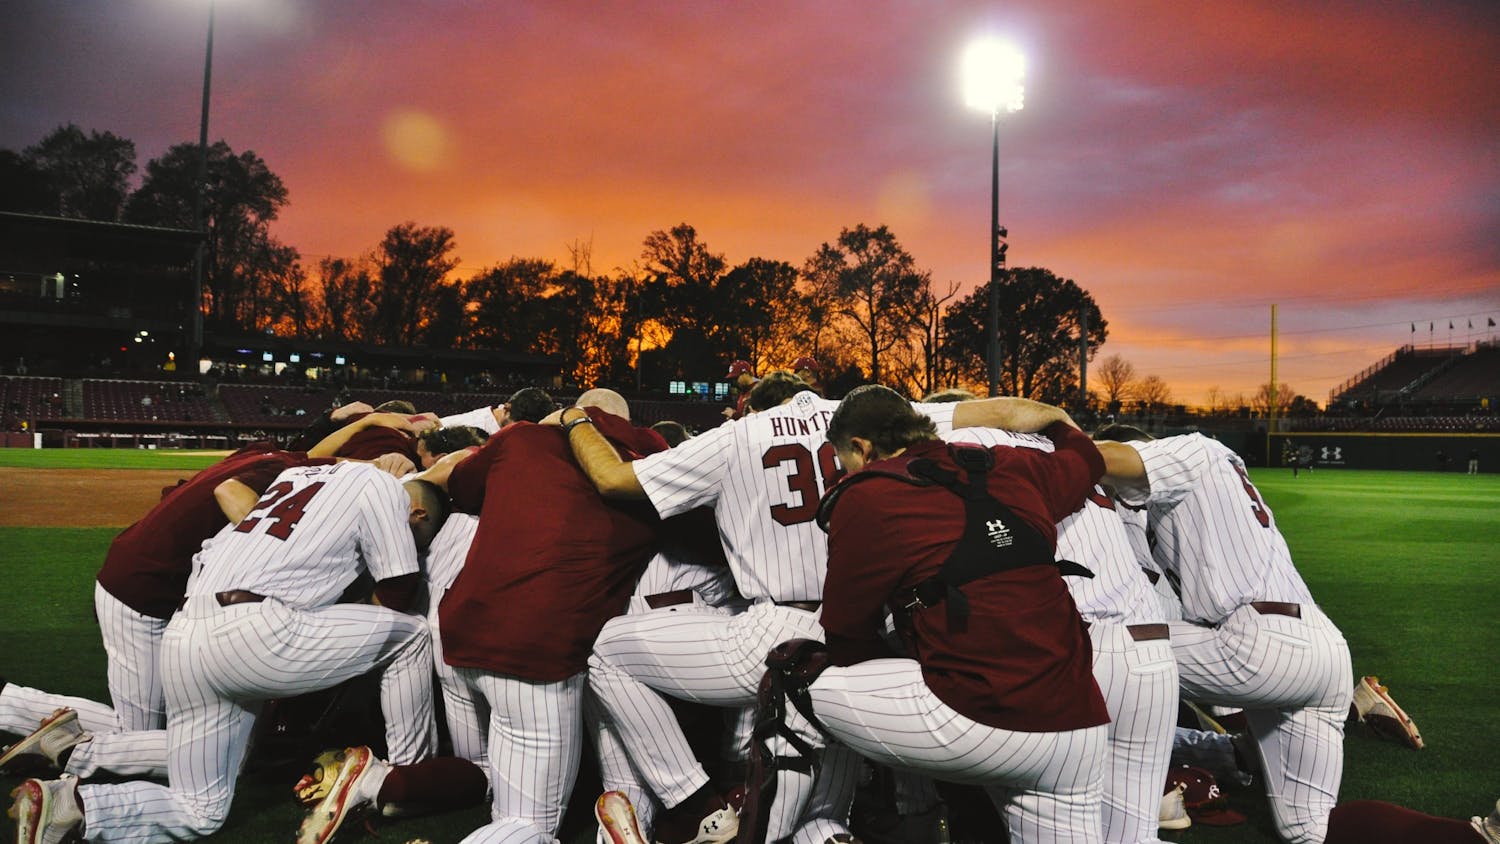 The South Carolina baseball team huddles during a game against Vanderbilt on Thursday, March 24, 2022 in Columbia, SC.